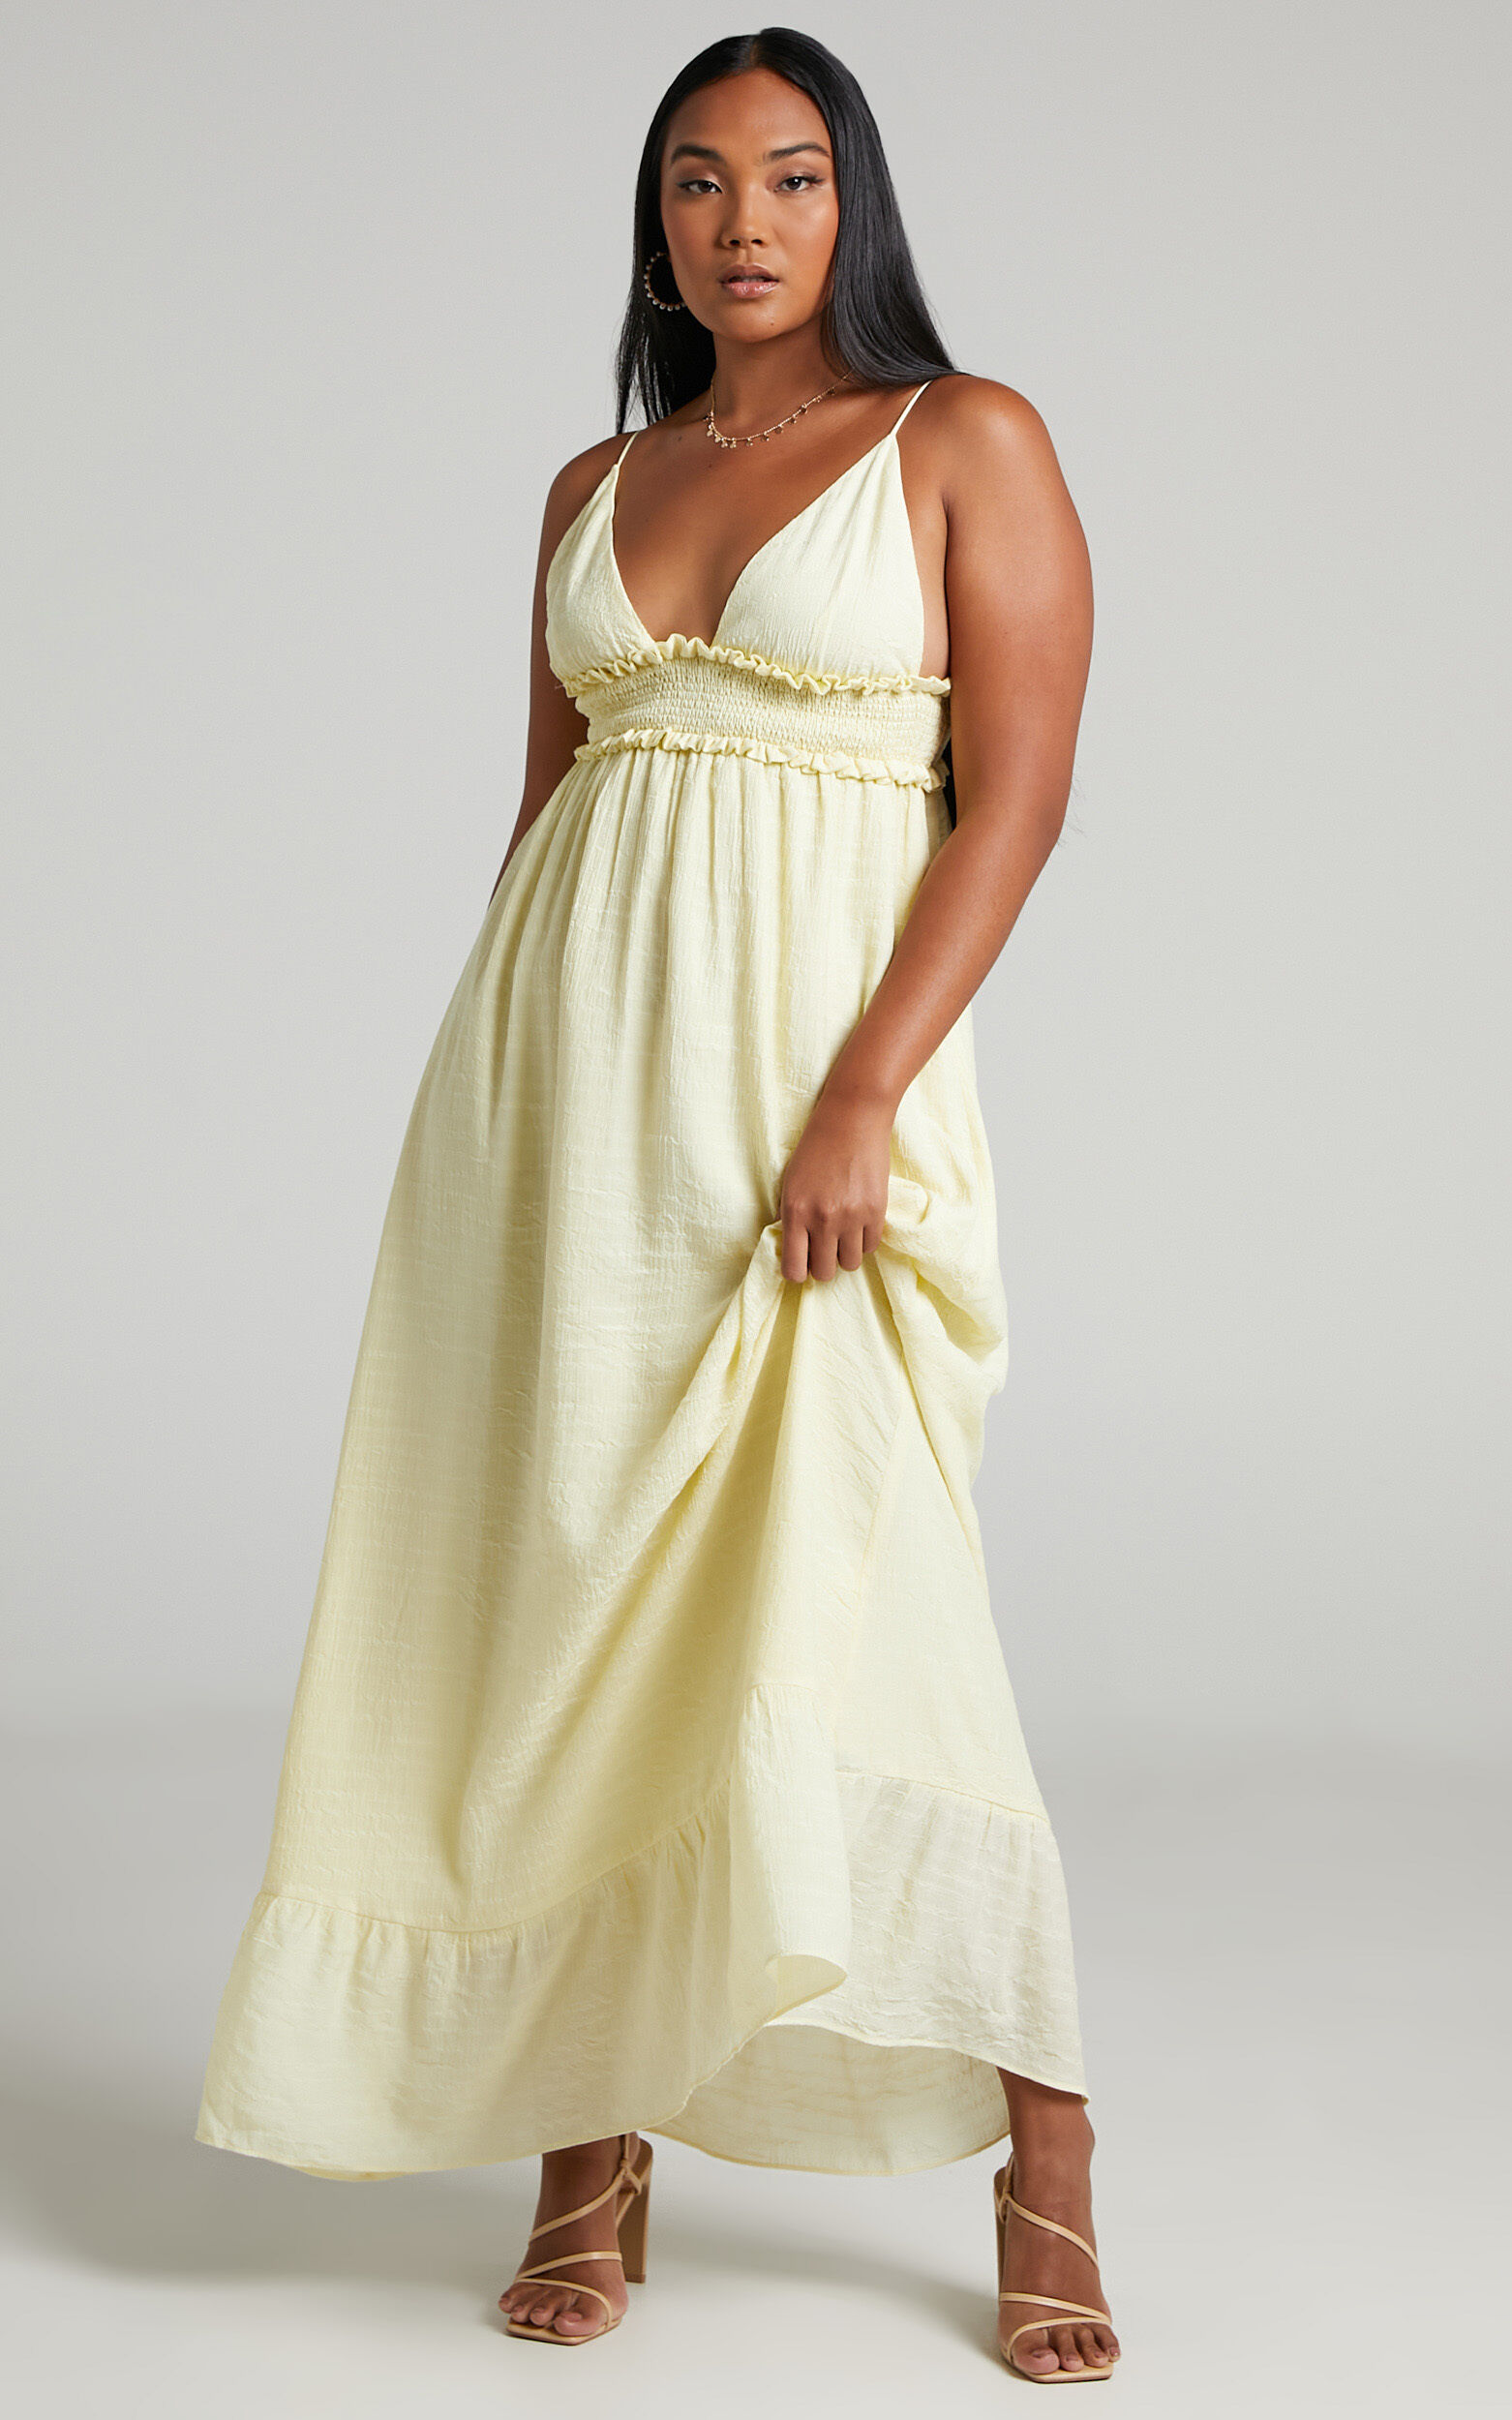 Millseila Strappy Full Skirt Maxi Dress in Yellow - 04, YEL1, super-hi-res image number null